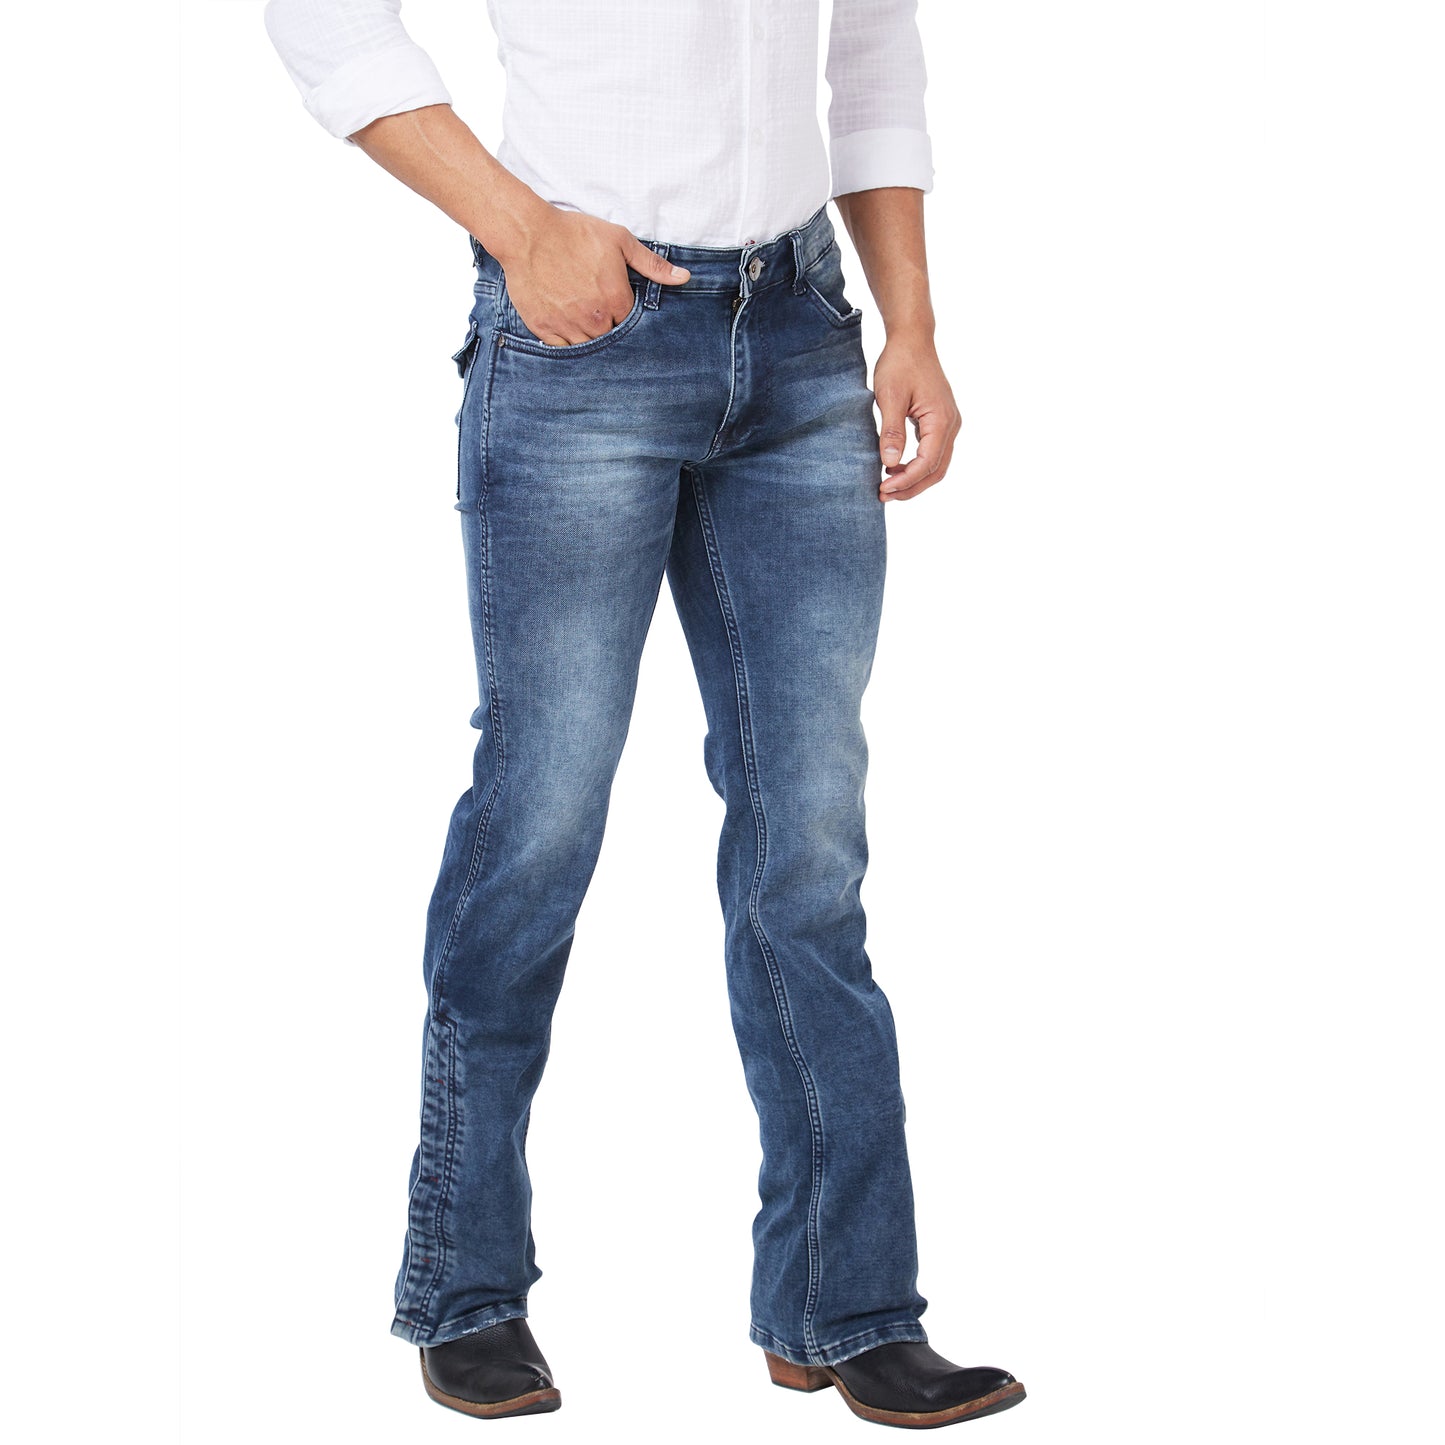 Men's Casual Slim Fit Straight Denim Boot-cut Jeans Stretchable